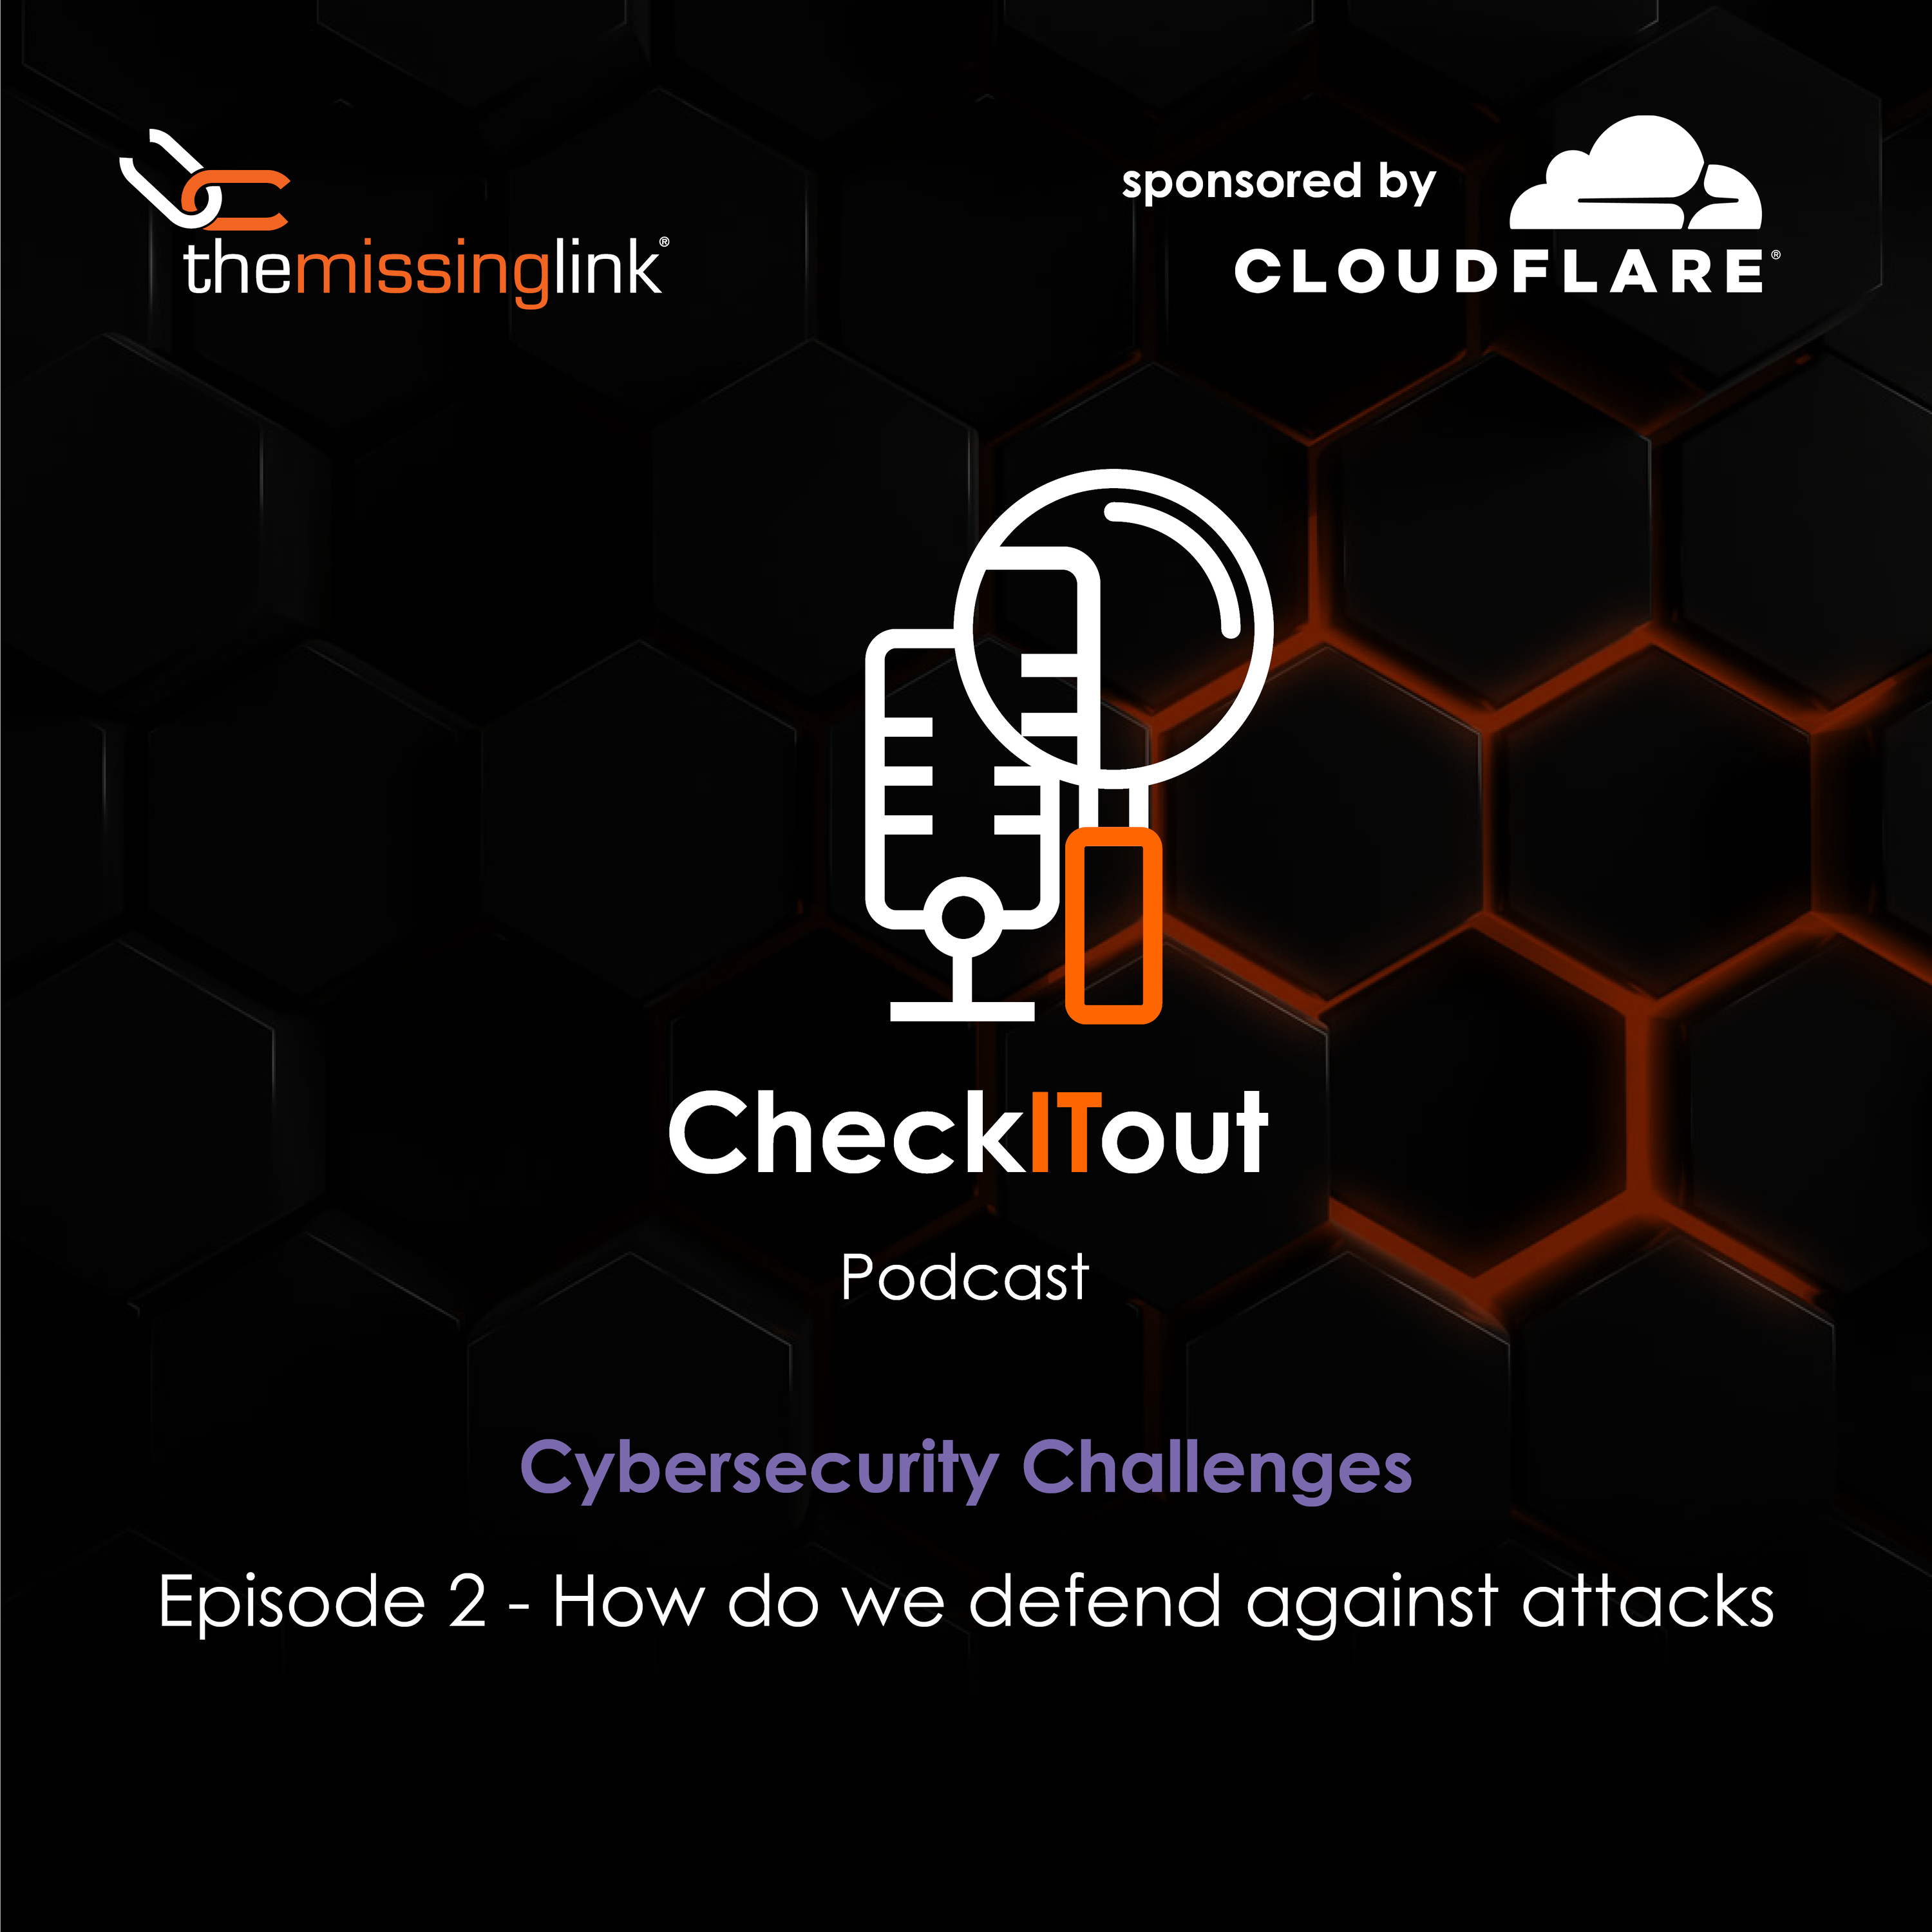 Cybersecurity Challenges - How do we defend against attacks?